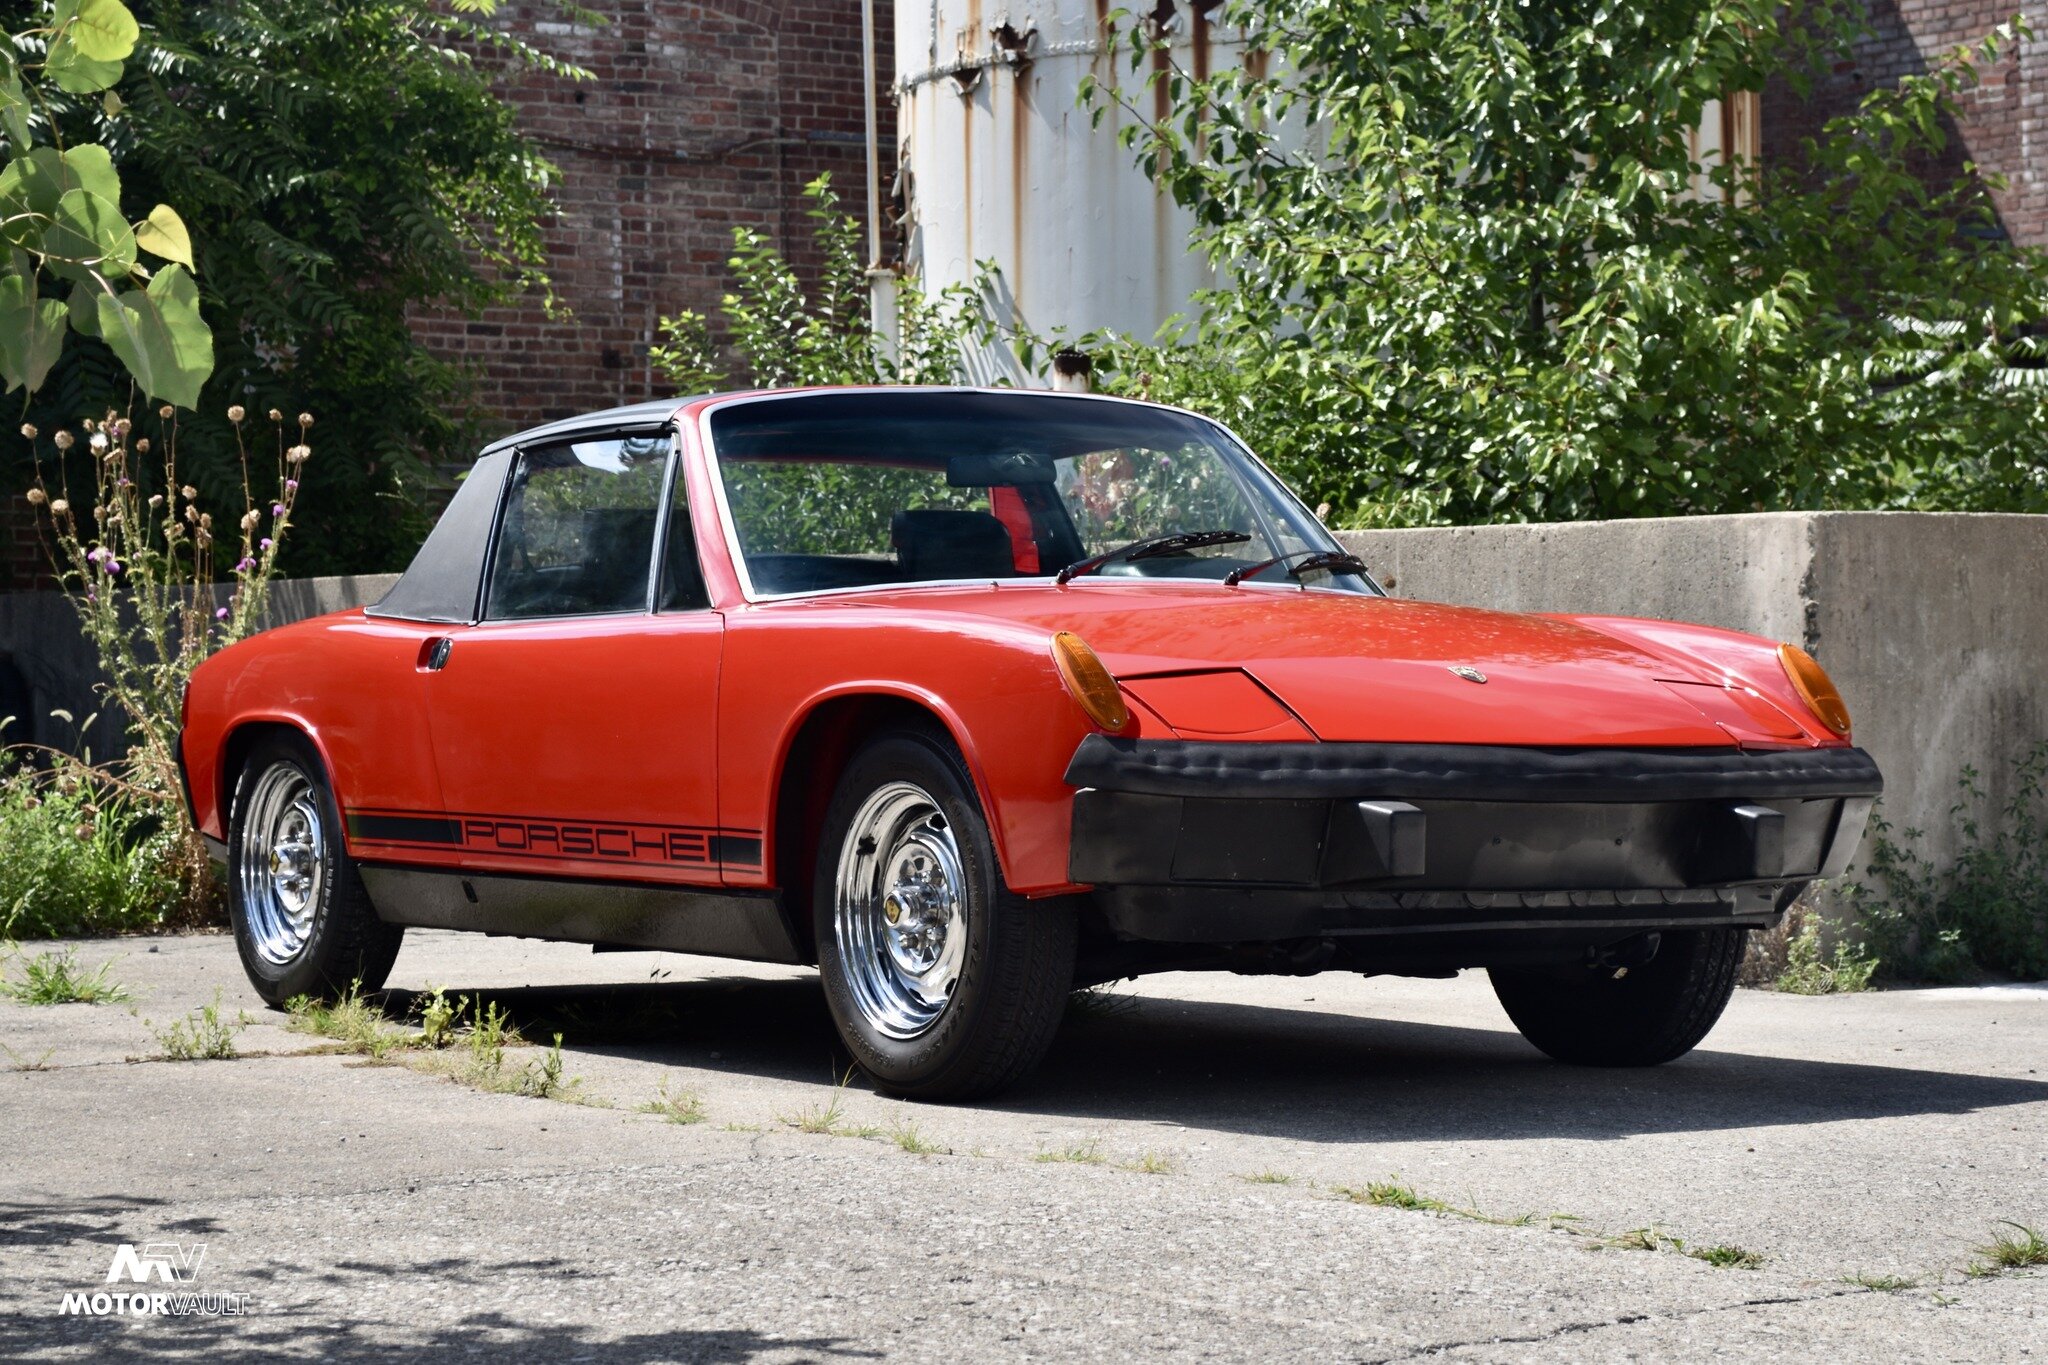 Looking for a cheap thrill to put under your Christmas tree? We have a wide variety of options for all enthusiasts: 

1974 Porsche 914 - Bahia Red - Restored - $20,000
1998 Pontiac Trans Am - 63k miles - LS1/Auto - $18,000
2006 Audi S4 Cab - 45k mile